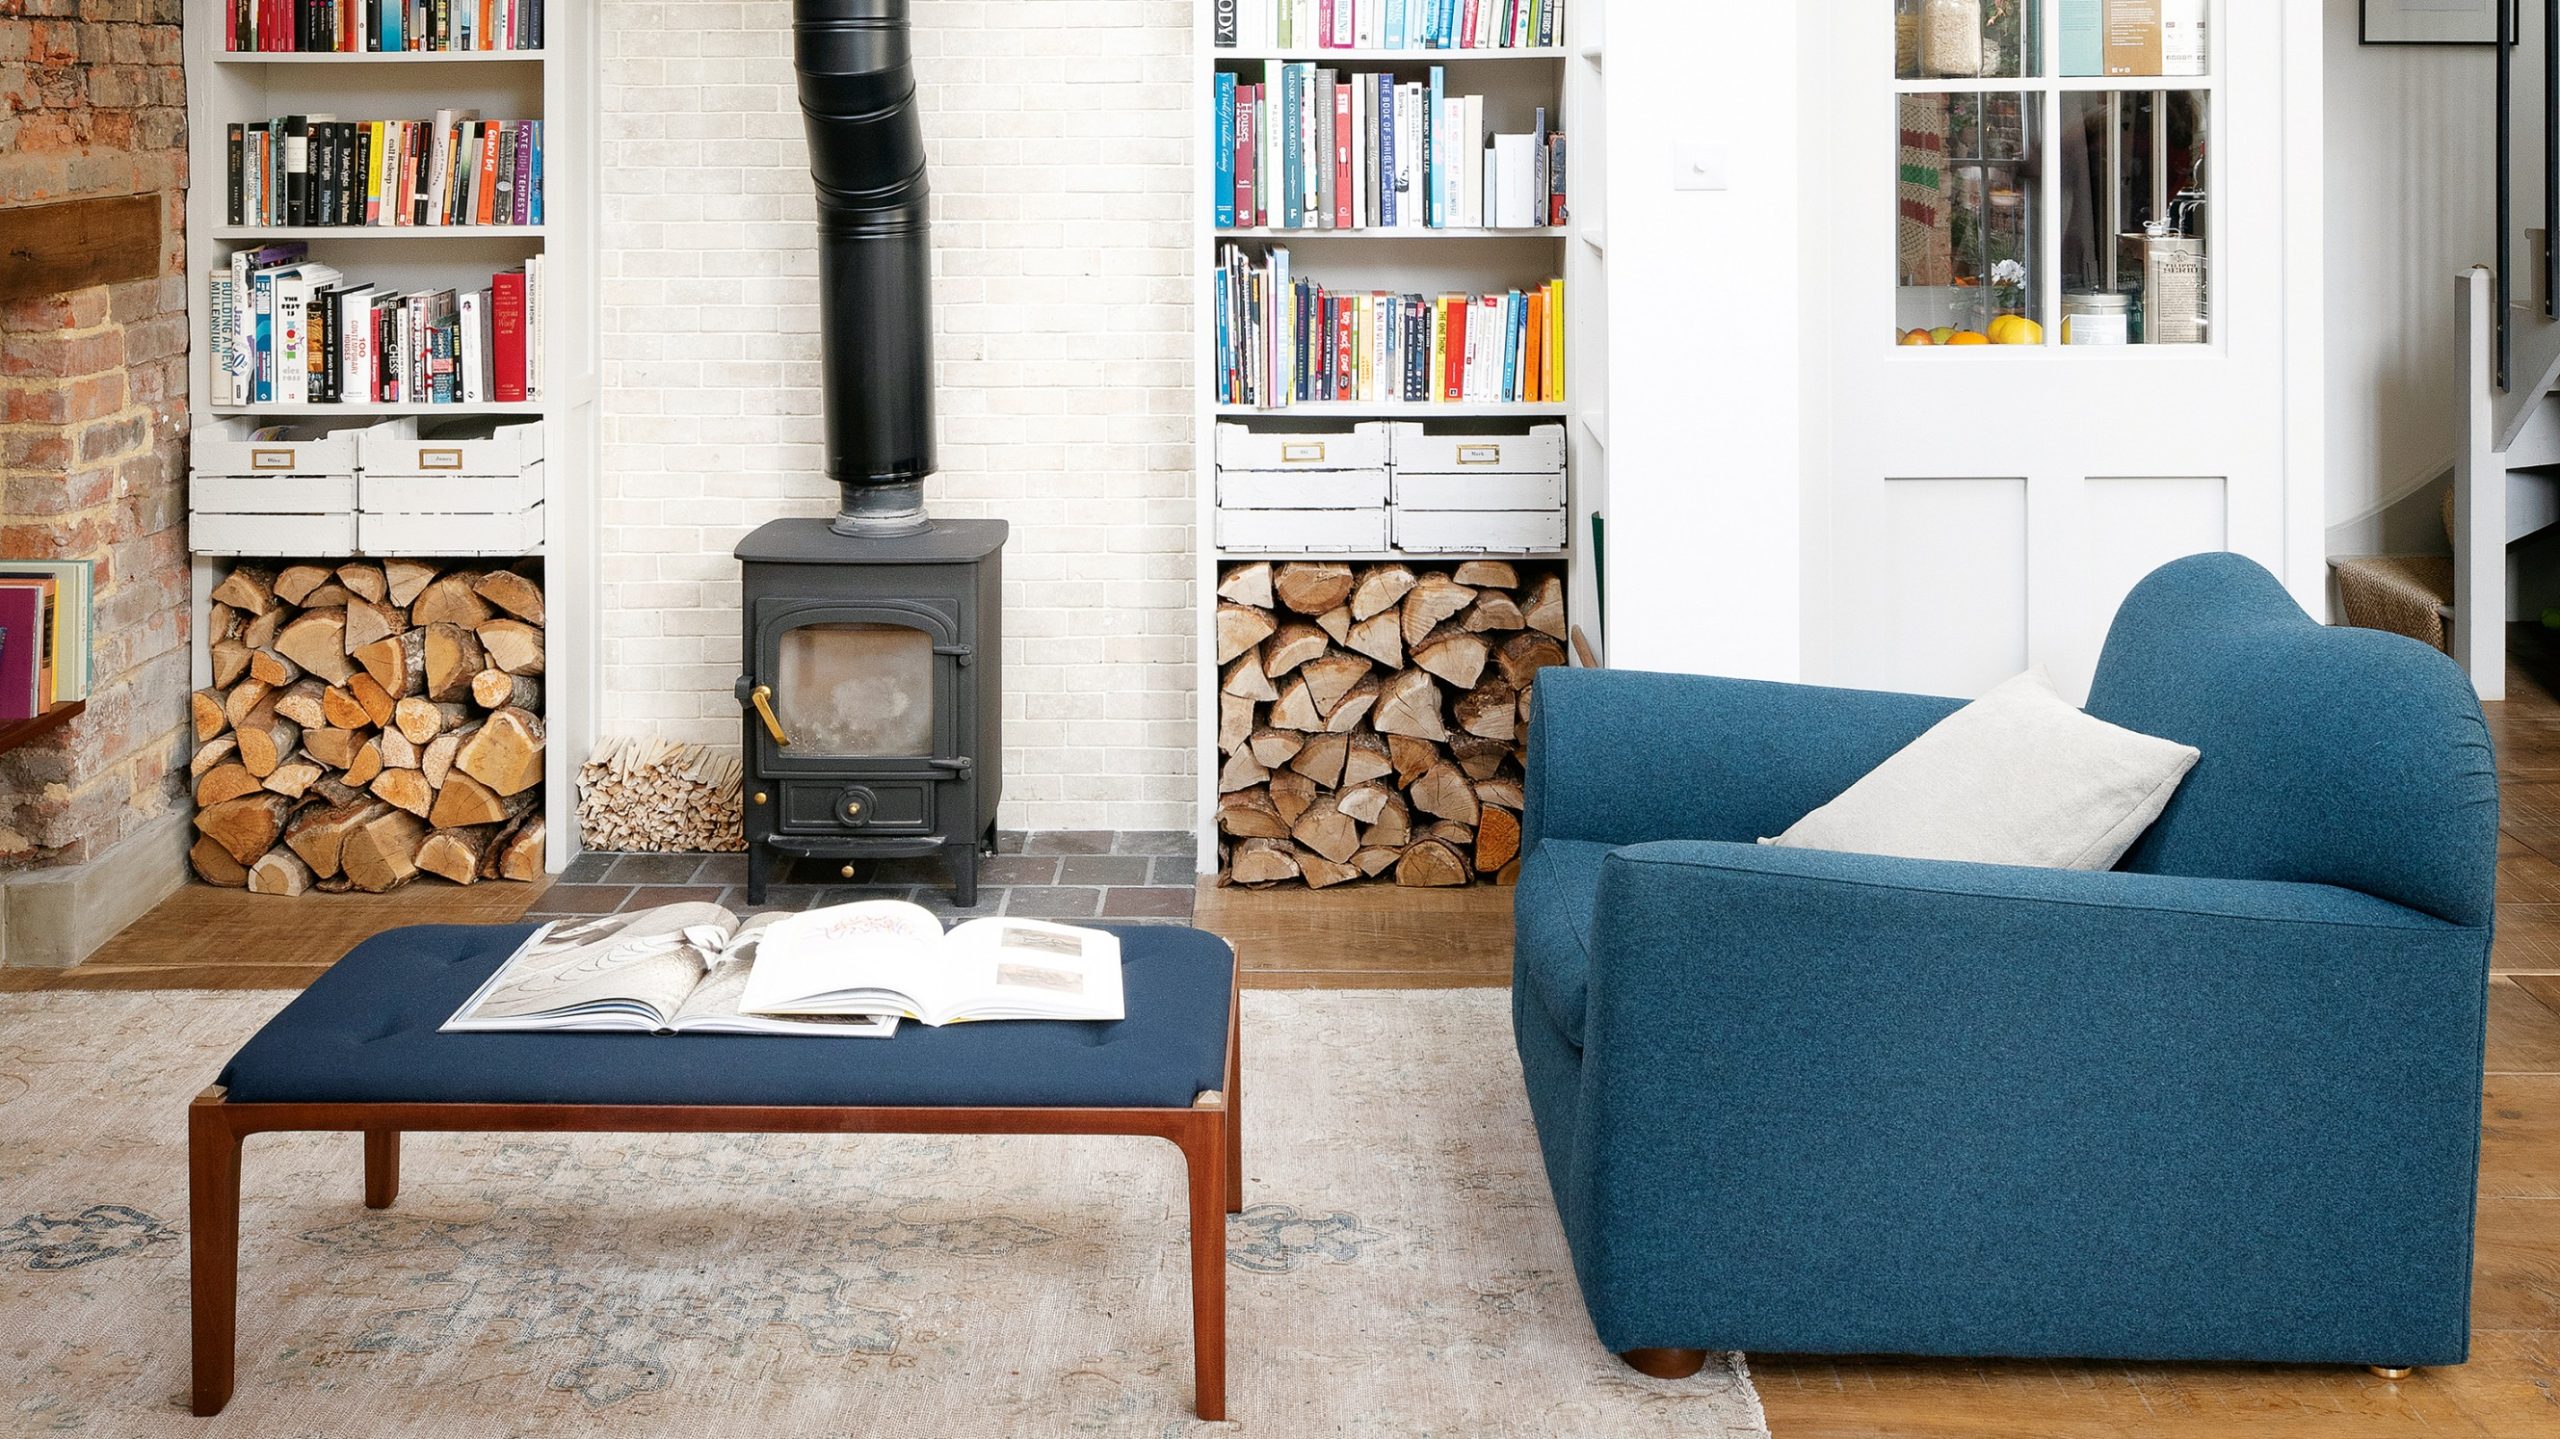 wood burner ideas to add warmth and coziness to your home